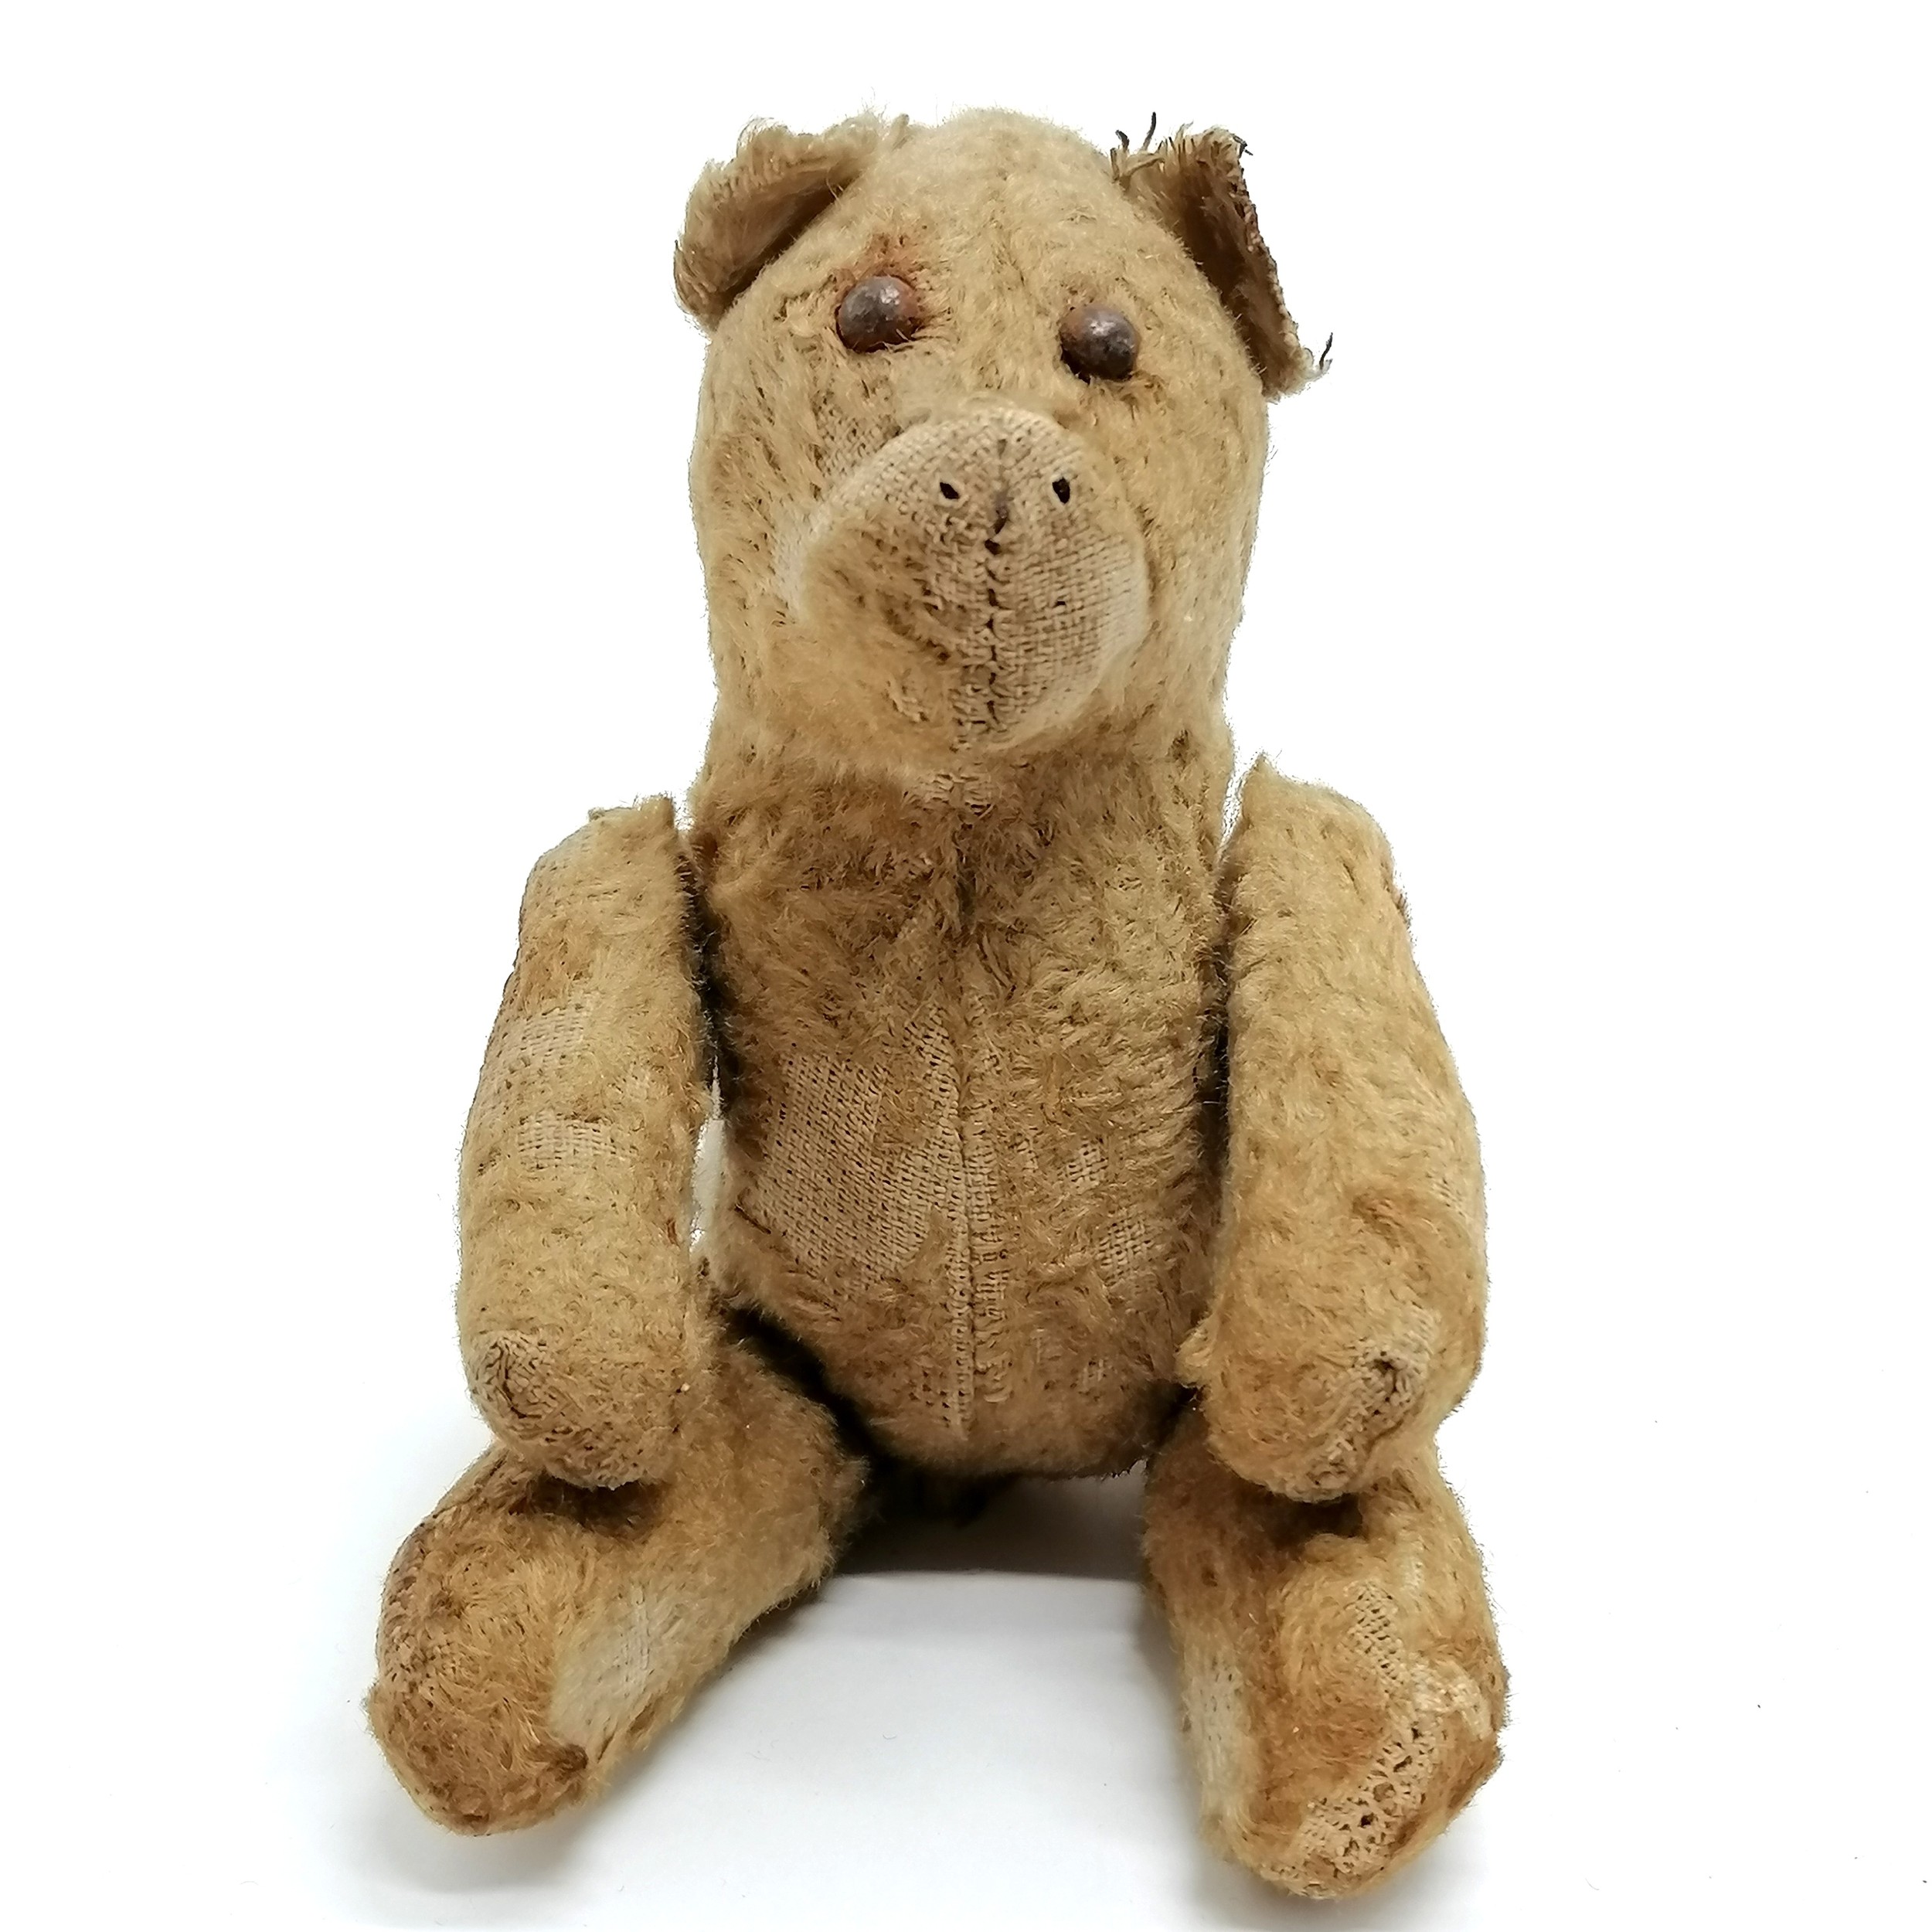 Antique jointed miniature mohair bear with metal button eyes - 13cm tall - in loveworn condition